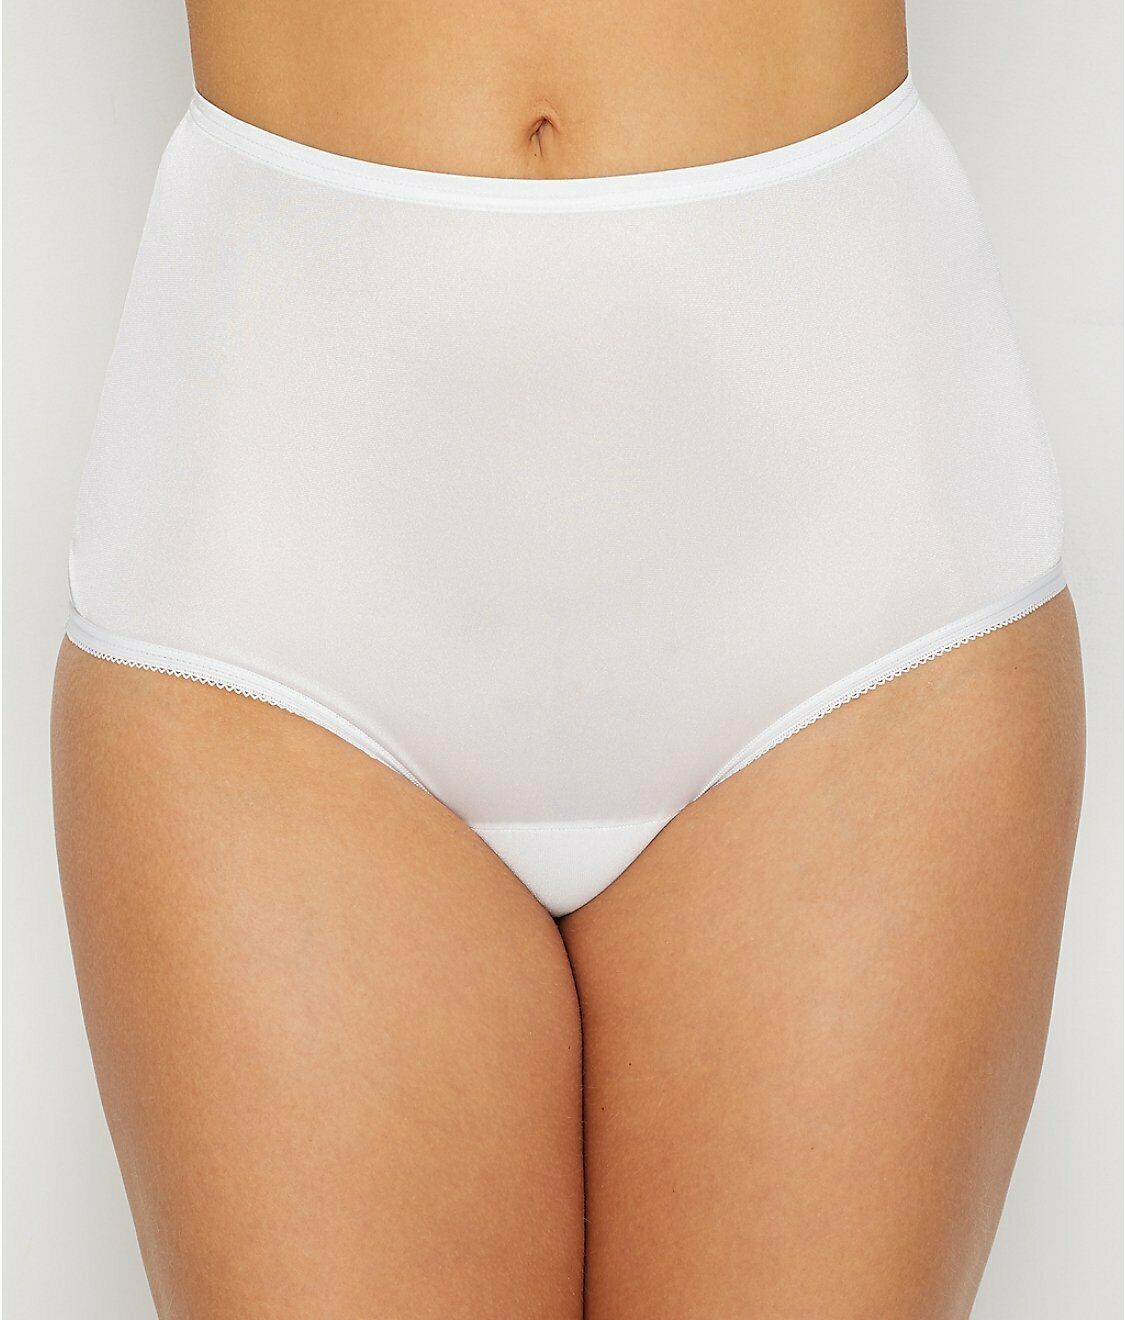 Vanity Fair Star White Perfectly Yours Ravissant Tailored Panty Us 8x Large Panties 